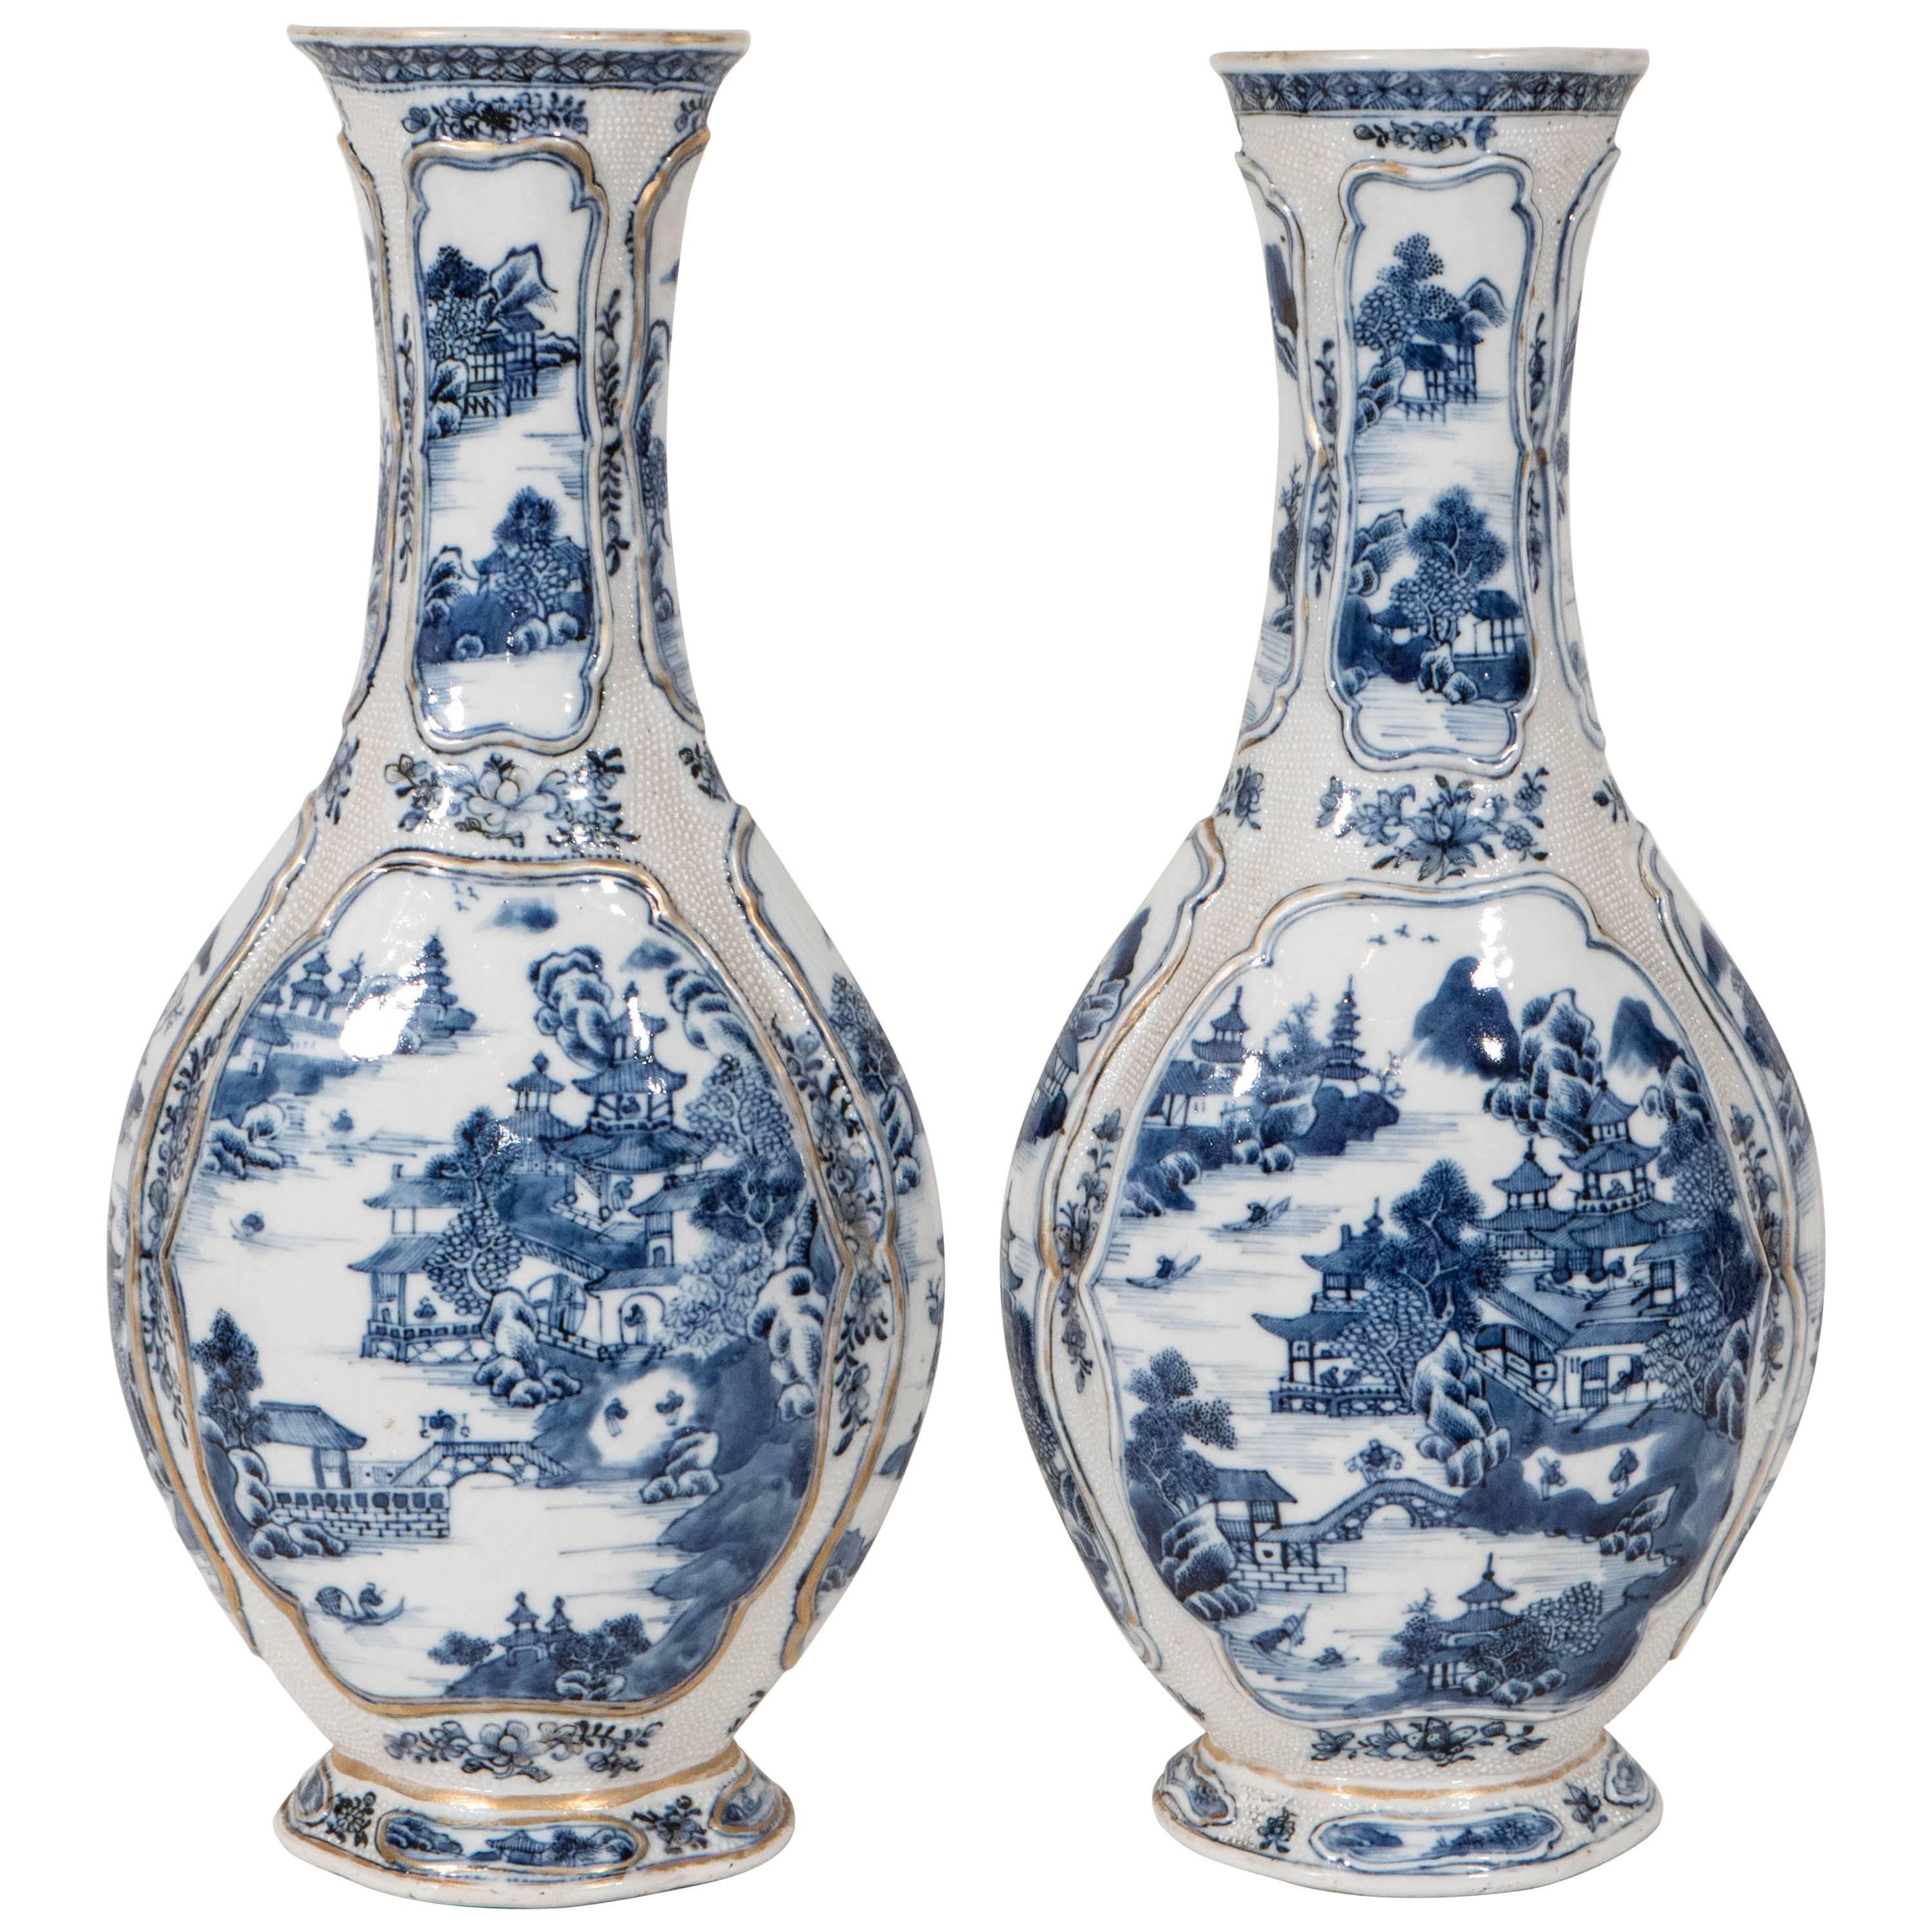 Pair of Antique Chinese Blue and White Porcelain Mantle Vases